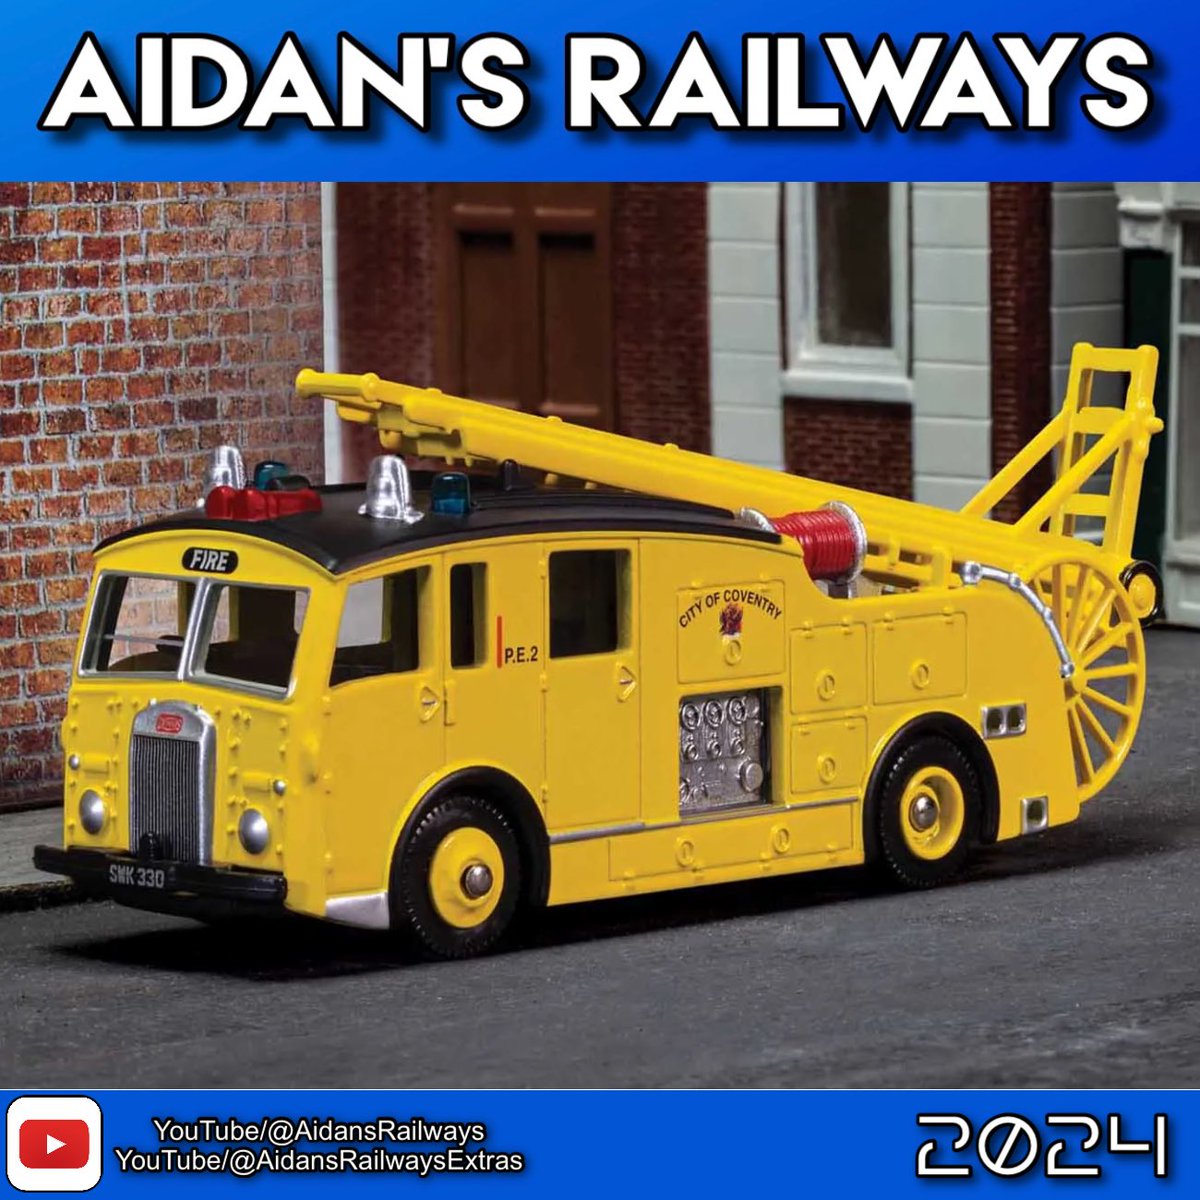 Dennis F12 Pump Escape - City of Coventry Fire Service

Purchase yours here 👉: prf.hn/l/DLZ8vYw

#diecastcollector #diecastmodel #diecast #planes #cars #classiccars #classiccar #car #modelrailway #modeltrains #trains #railway #hornbytrains #modelrailways #modeltrain